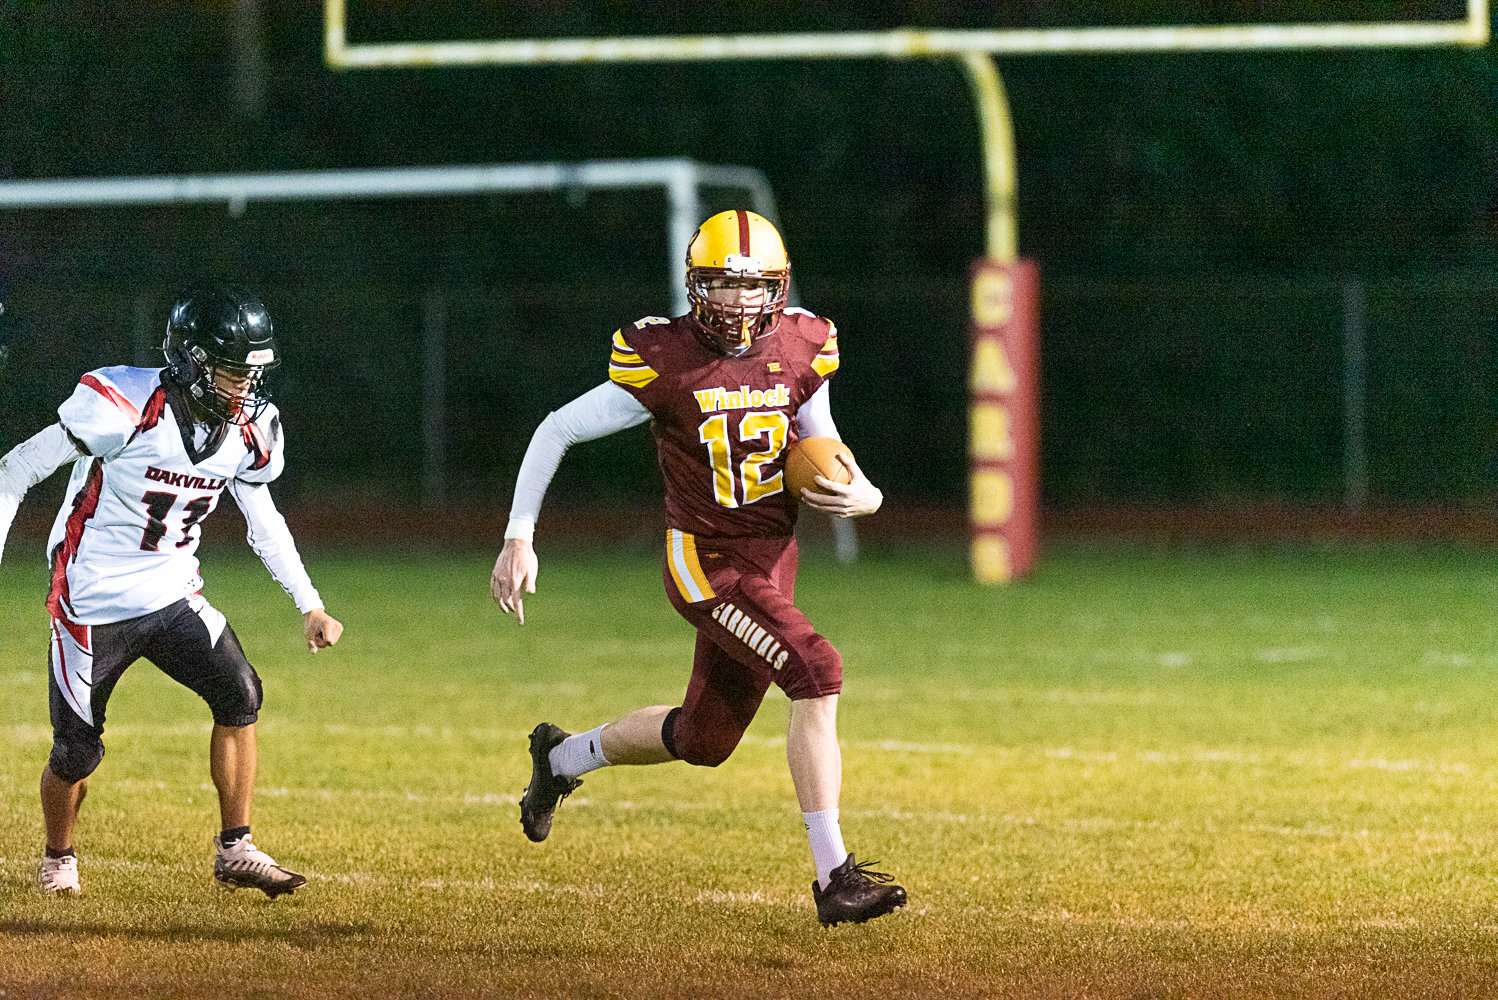 Chase Scofield carries the ball for Winlock in the Cardinals' 36-28 win over Oakville on Oct. 7.